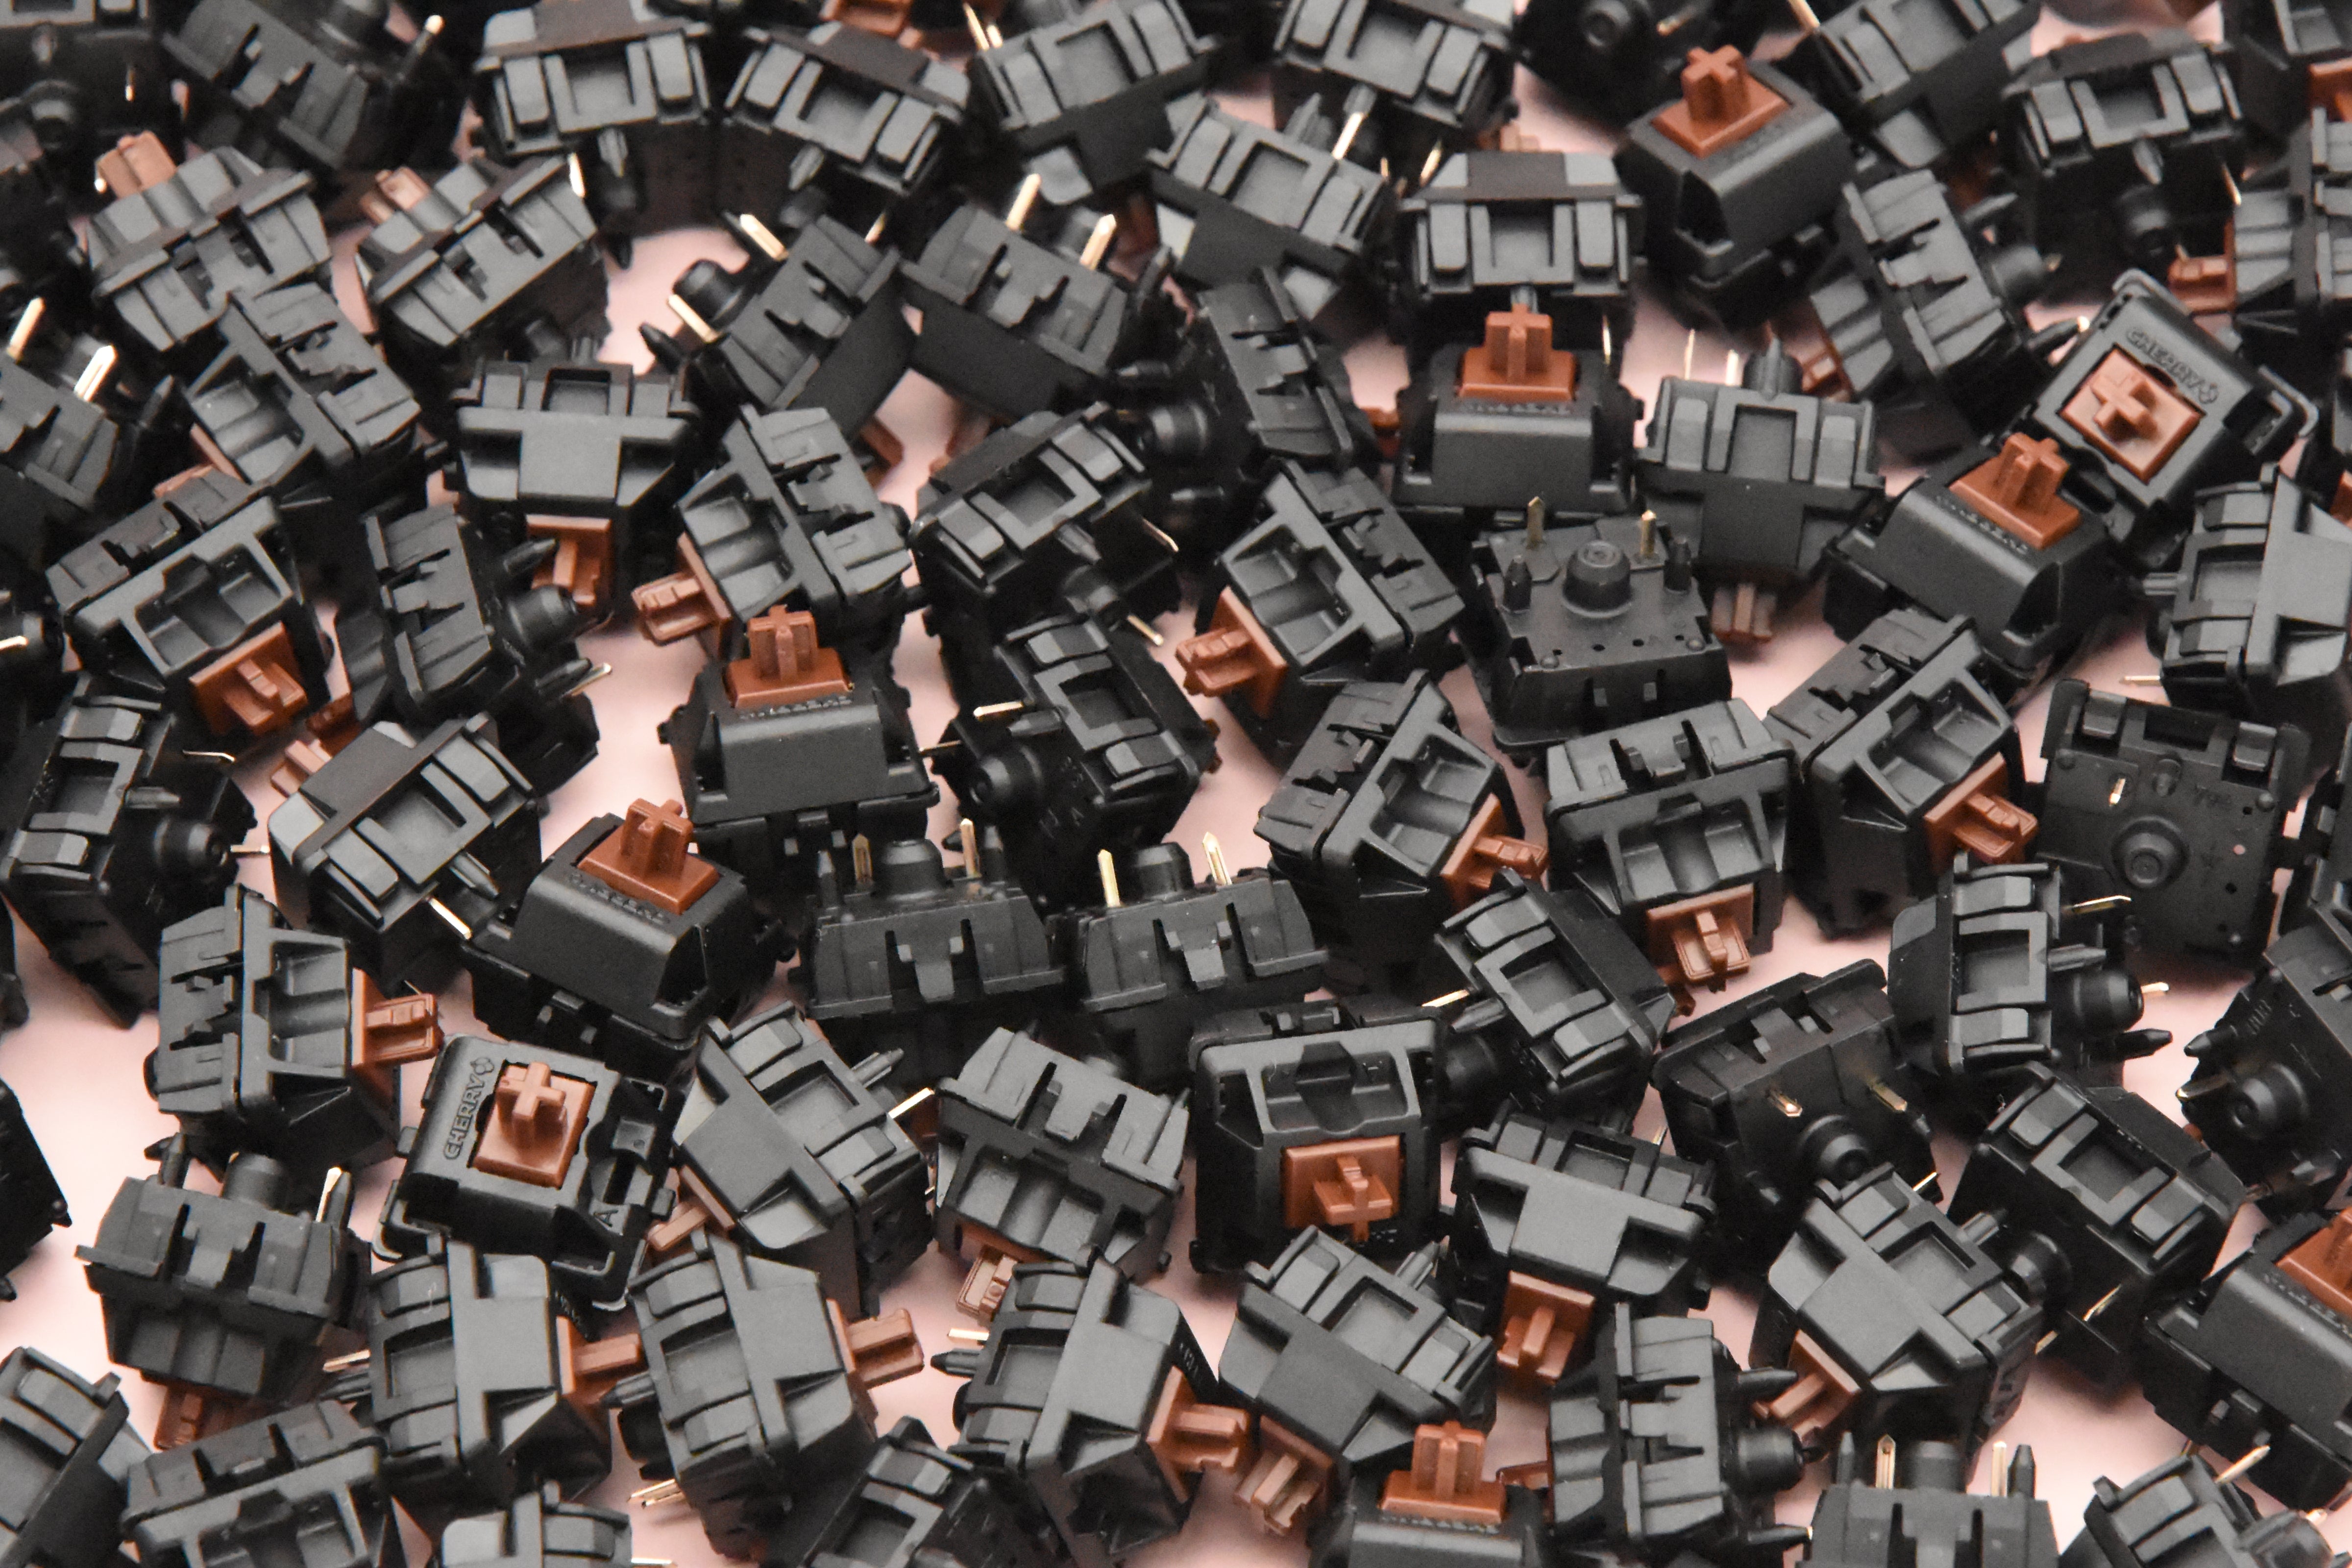 CHERRY MX HYPERGLIDE BROWN TACTILE SWITCH (10 PCS)